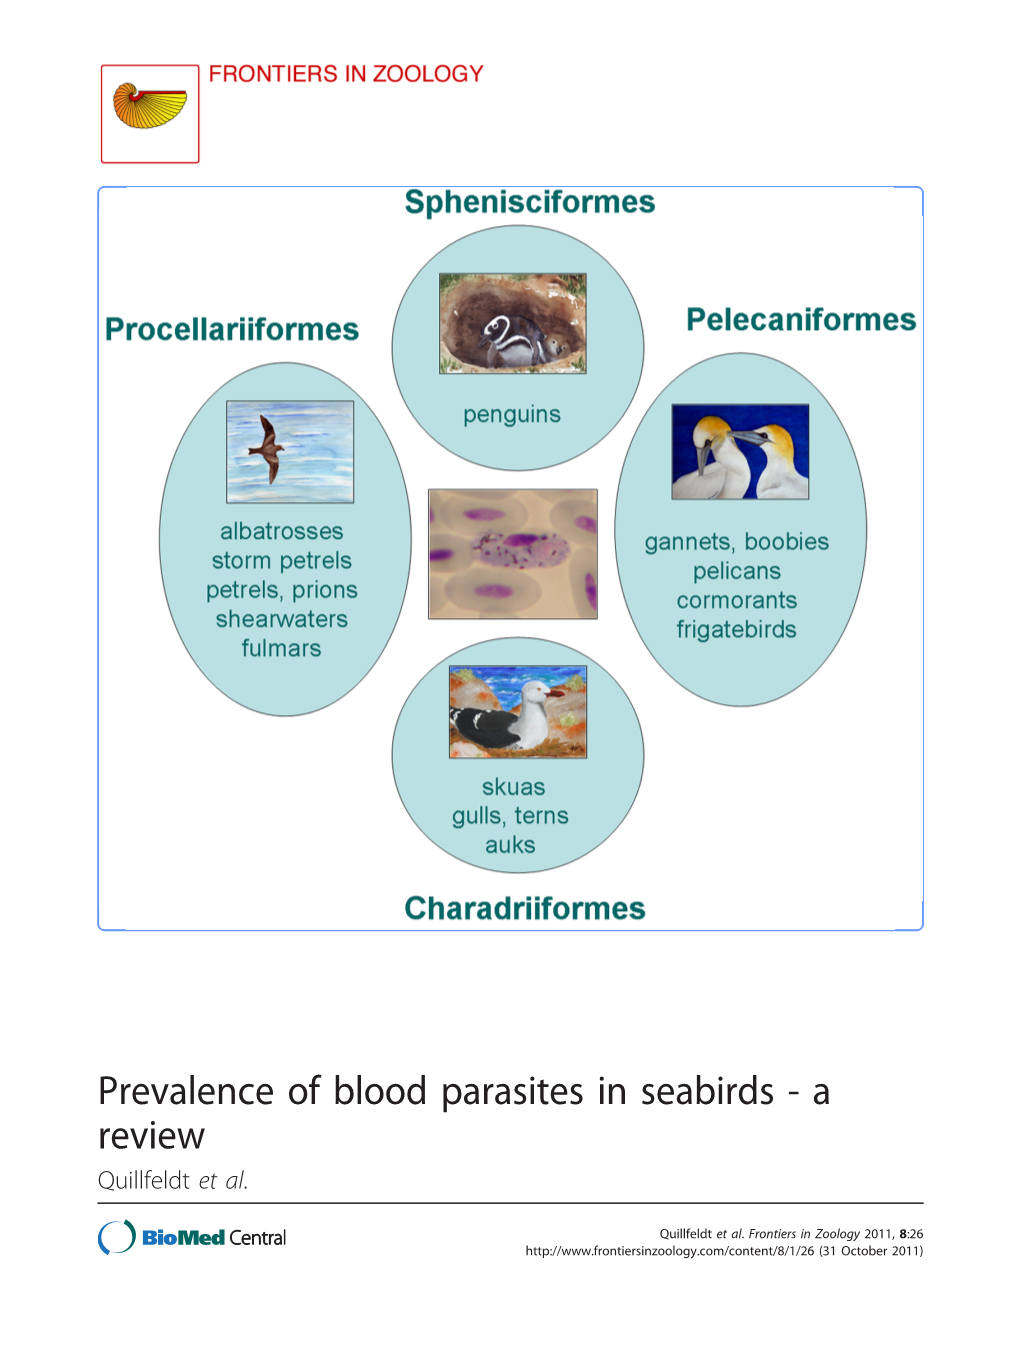 Prevalence of Blood Parasites in Seabirds-A Review